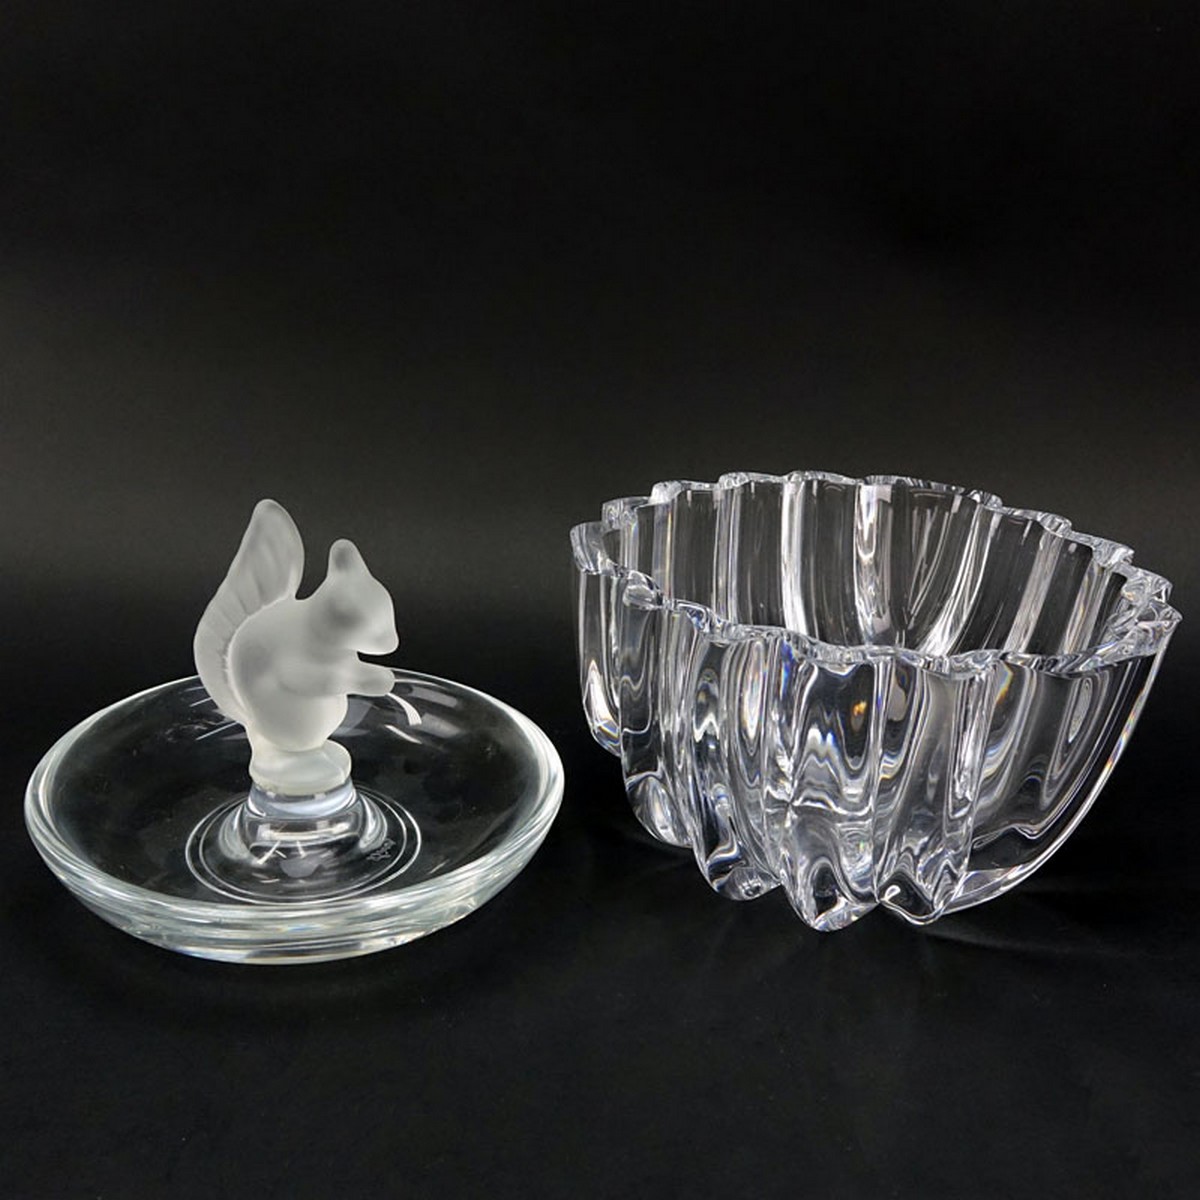 Grouping of Two (2): Orrefors Crystal Bowl, Sevres Crystal and Frosted Crystal Squirrel Candy Dish. All appropriately signed.